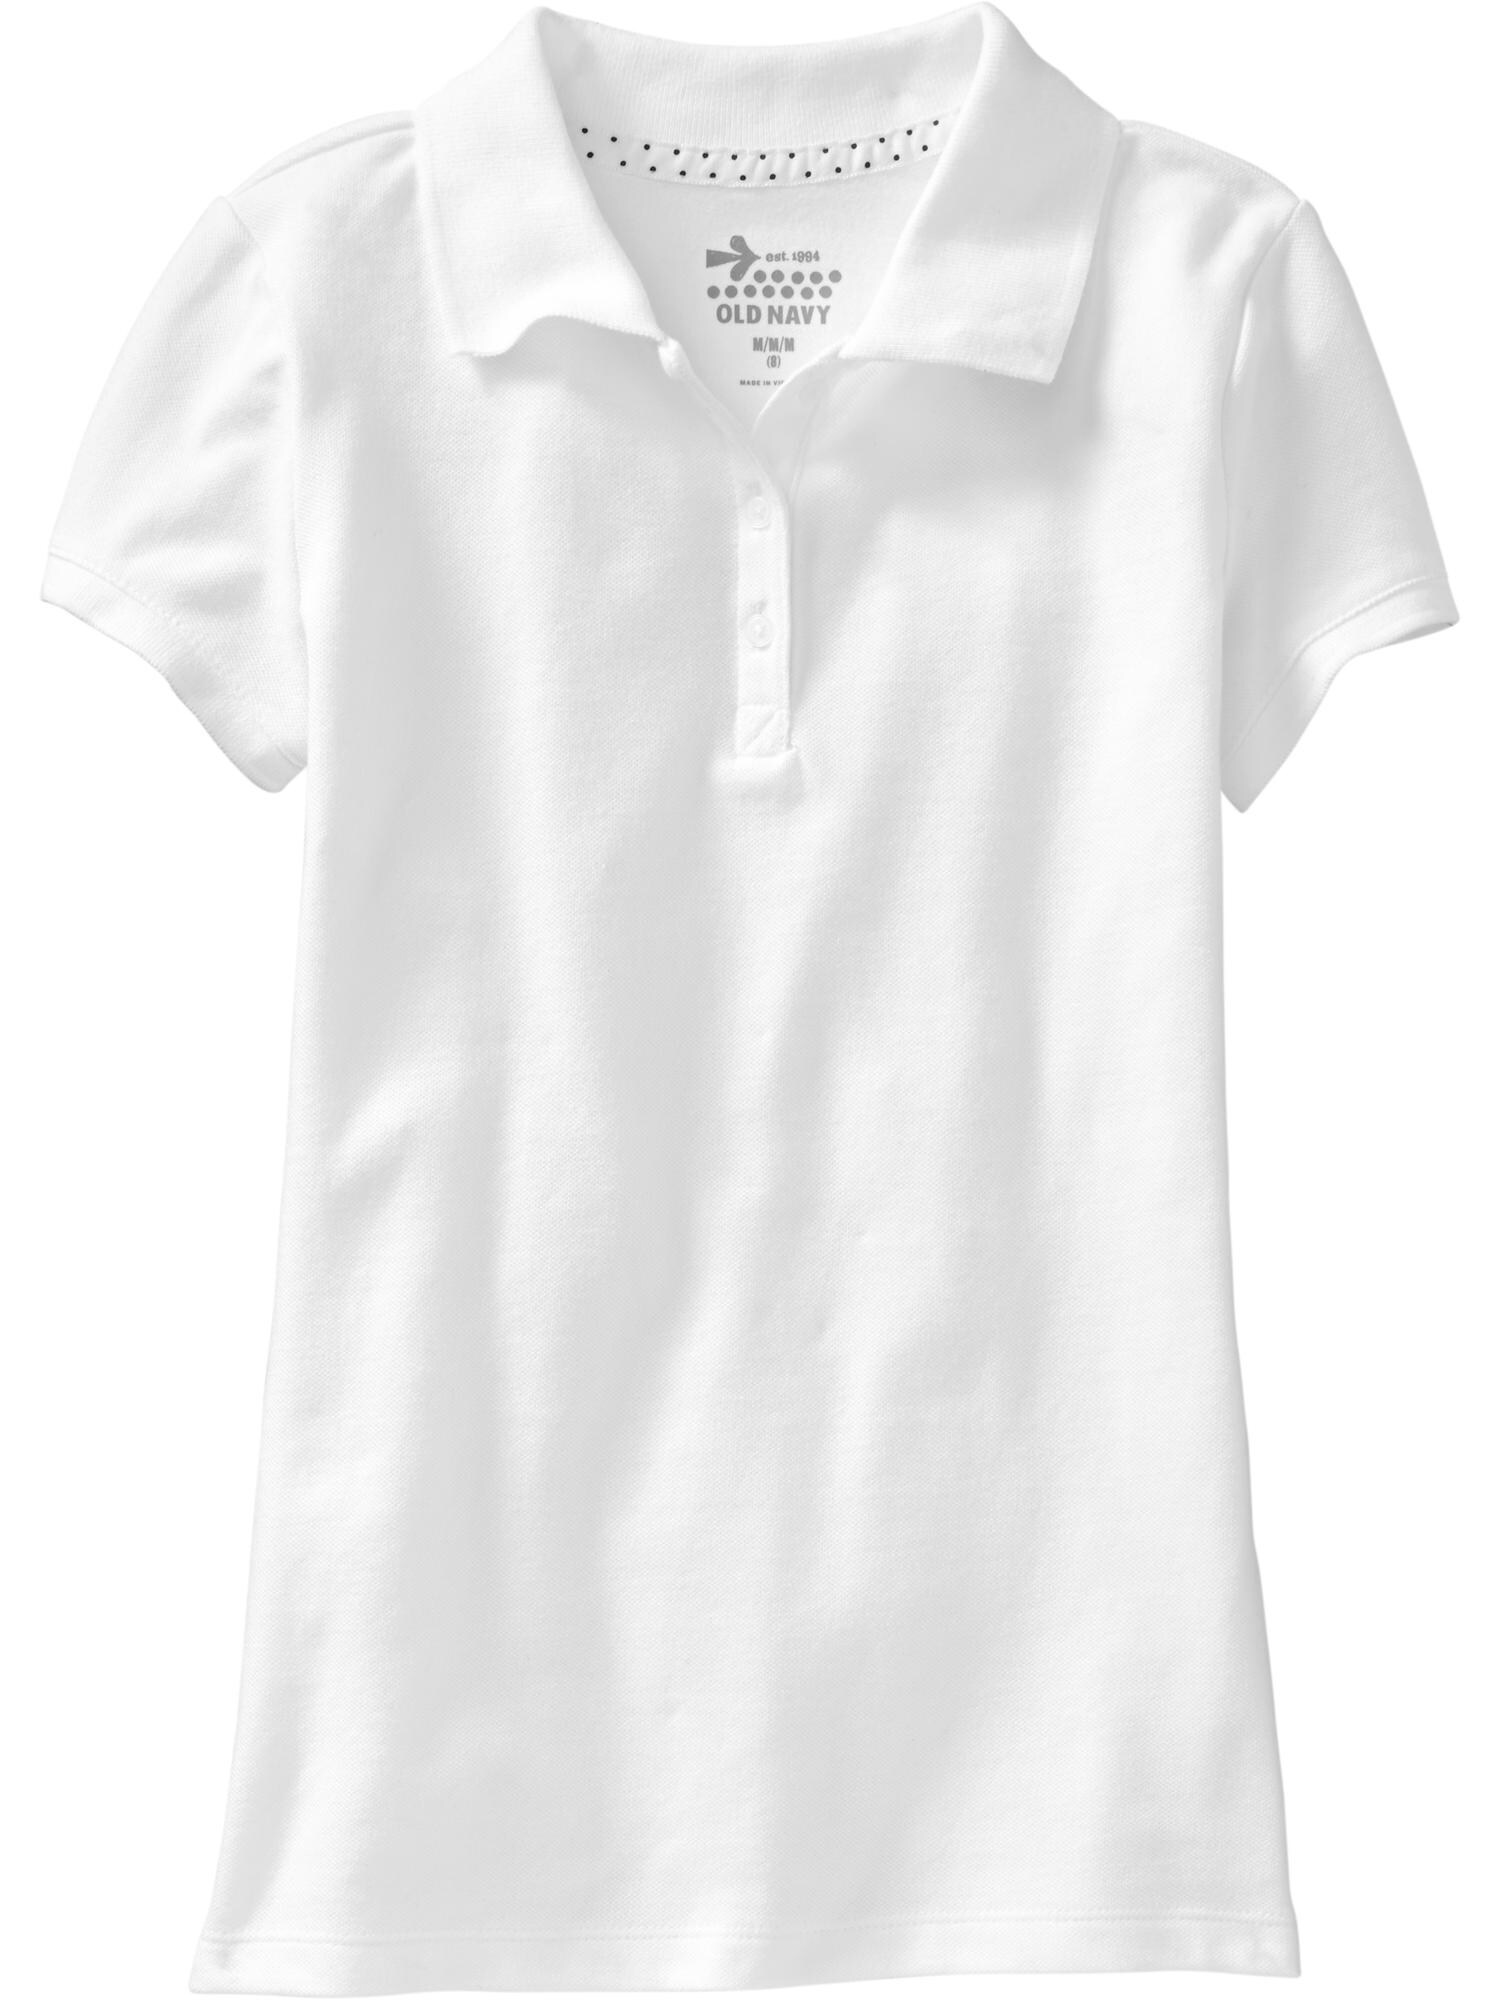 womens white polo shirts old navy